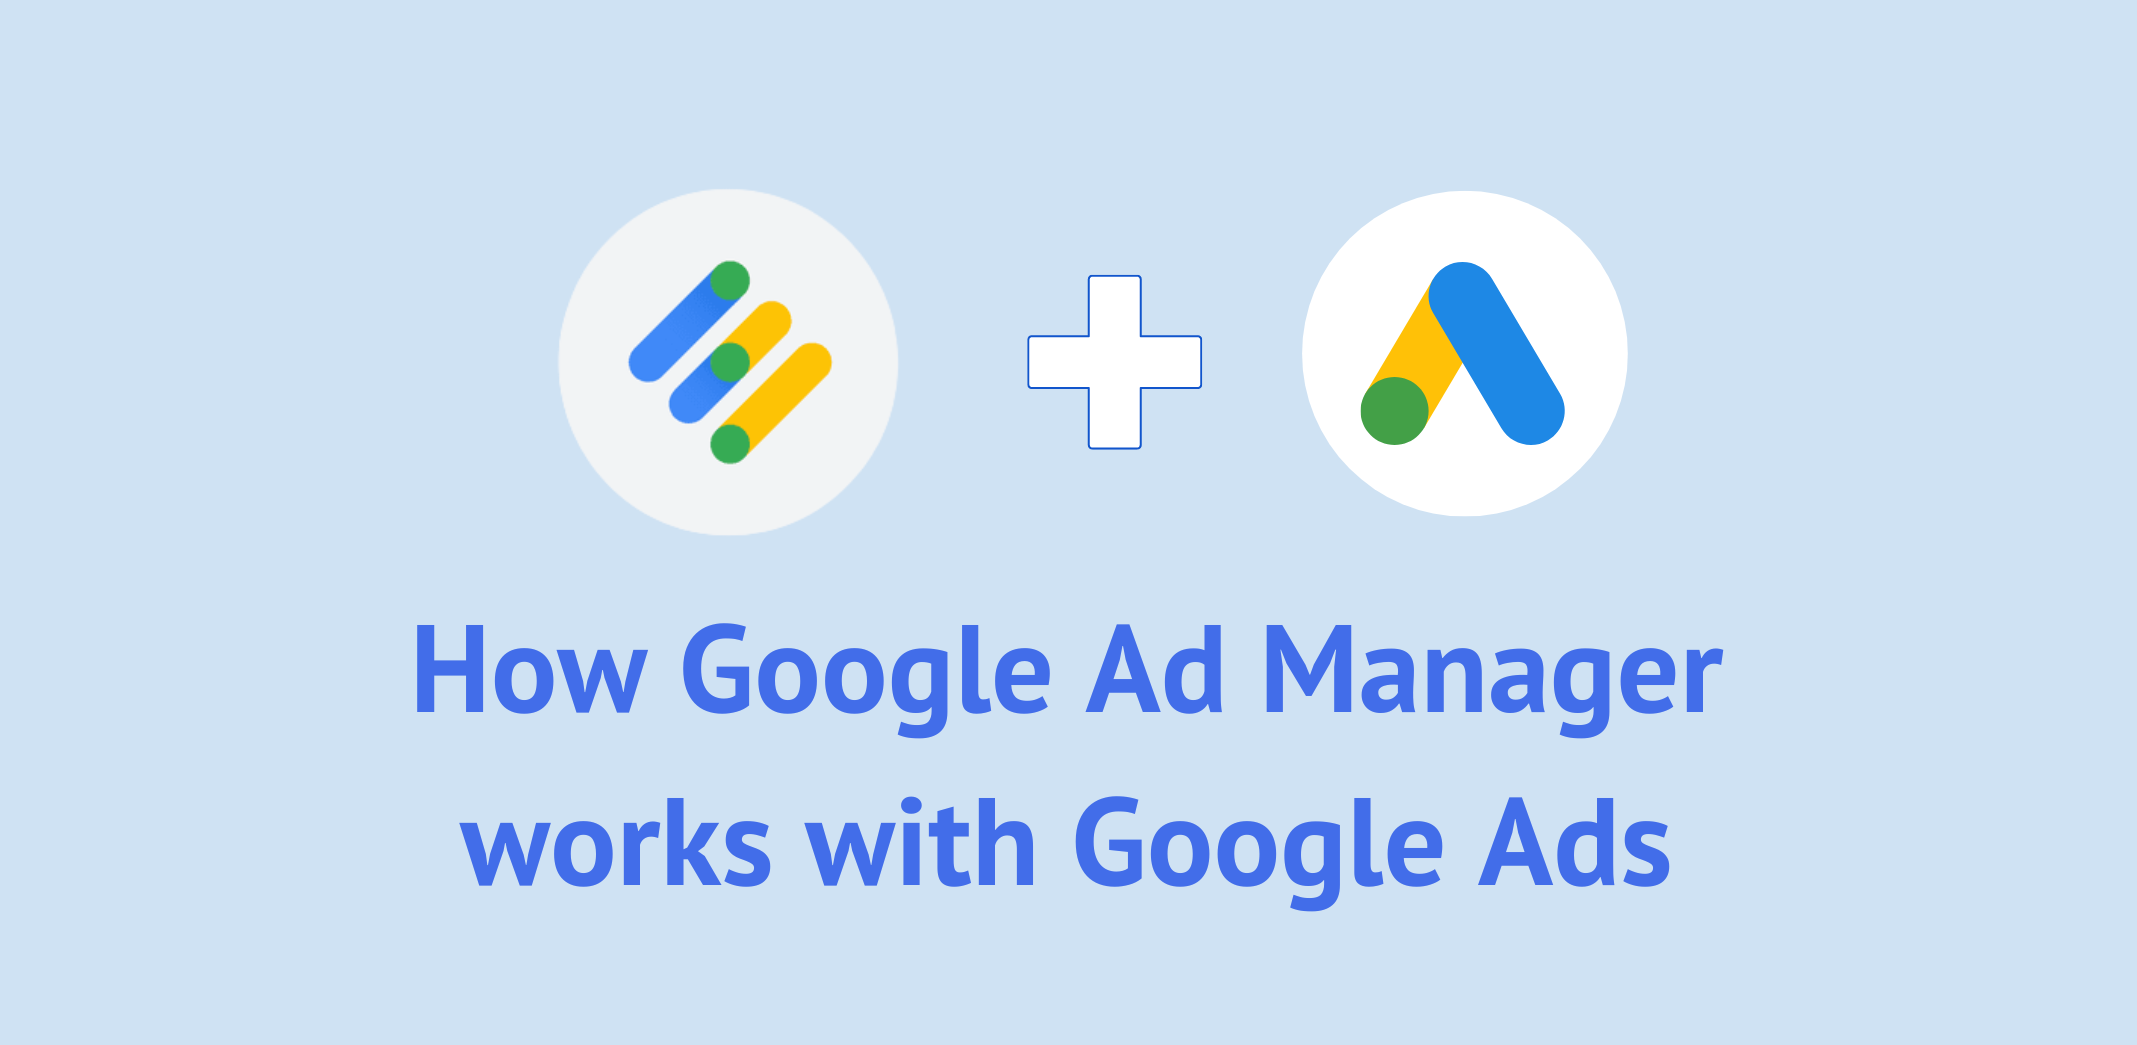 How Google Ad Manager works with Google Ads